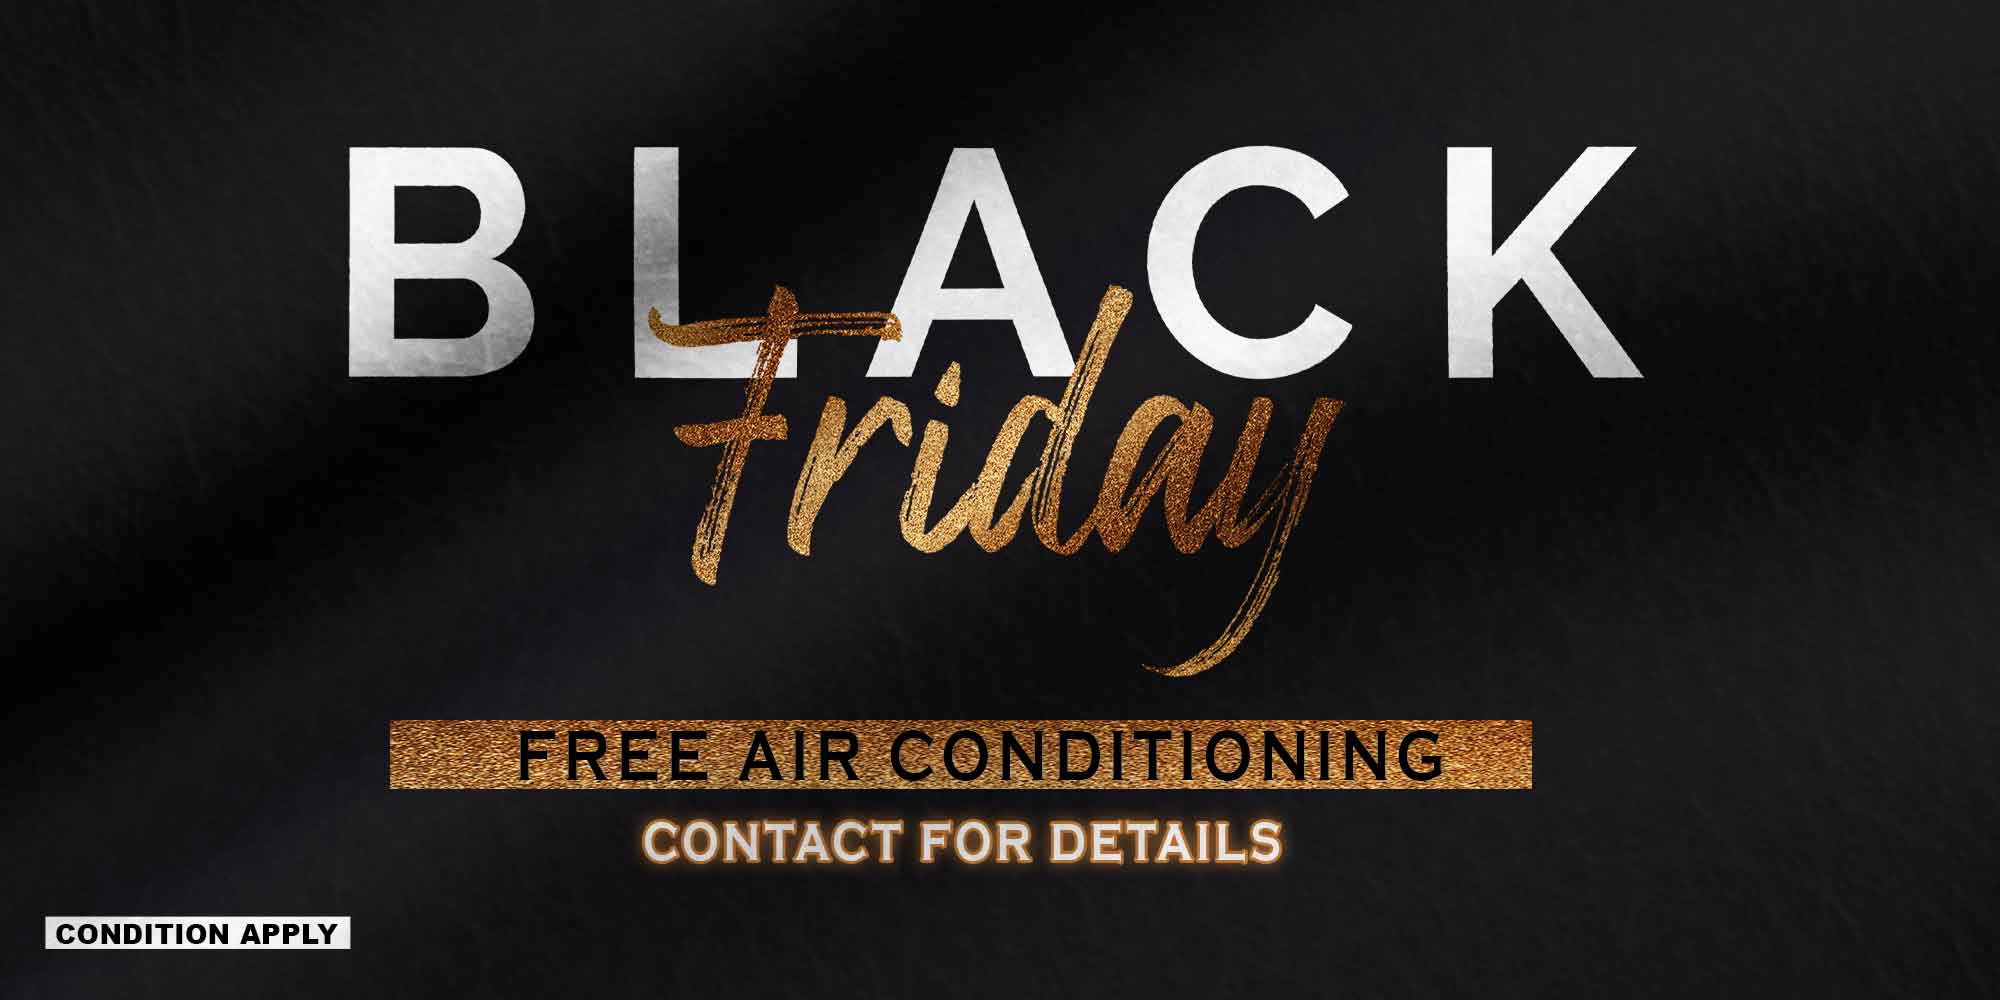 camheating - Black Friday Offer